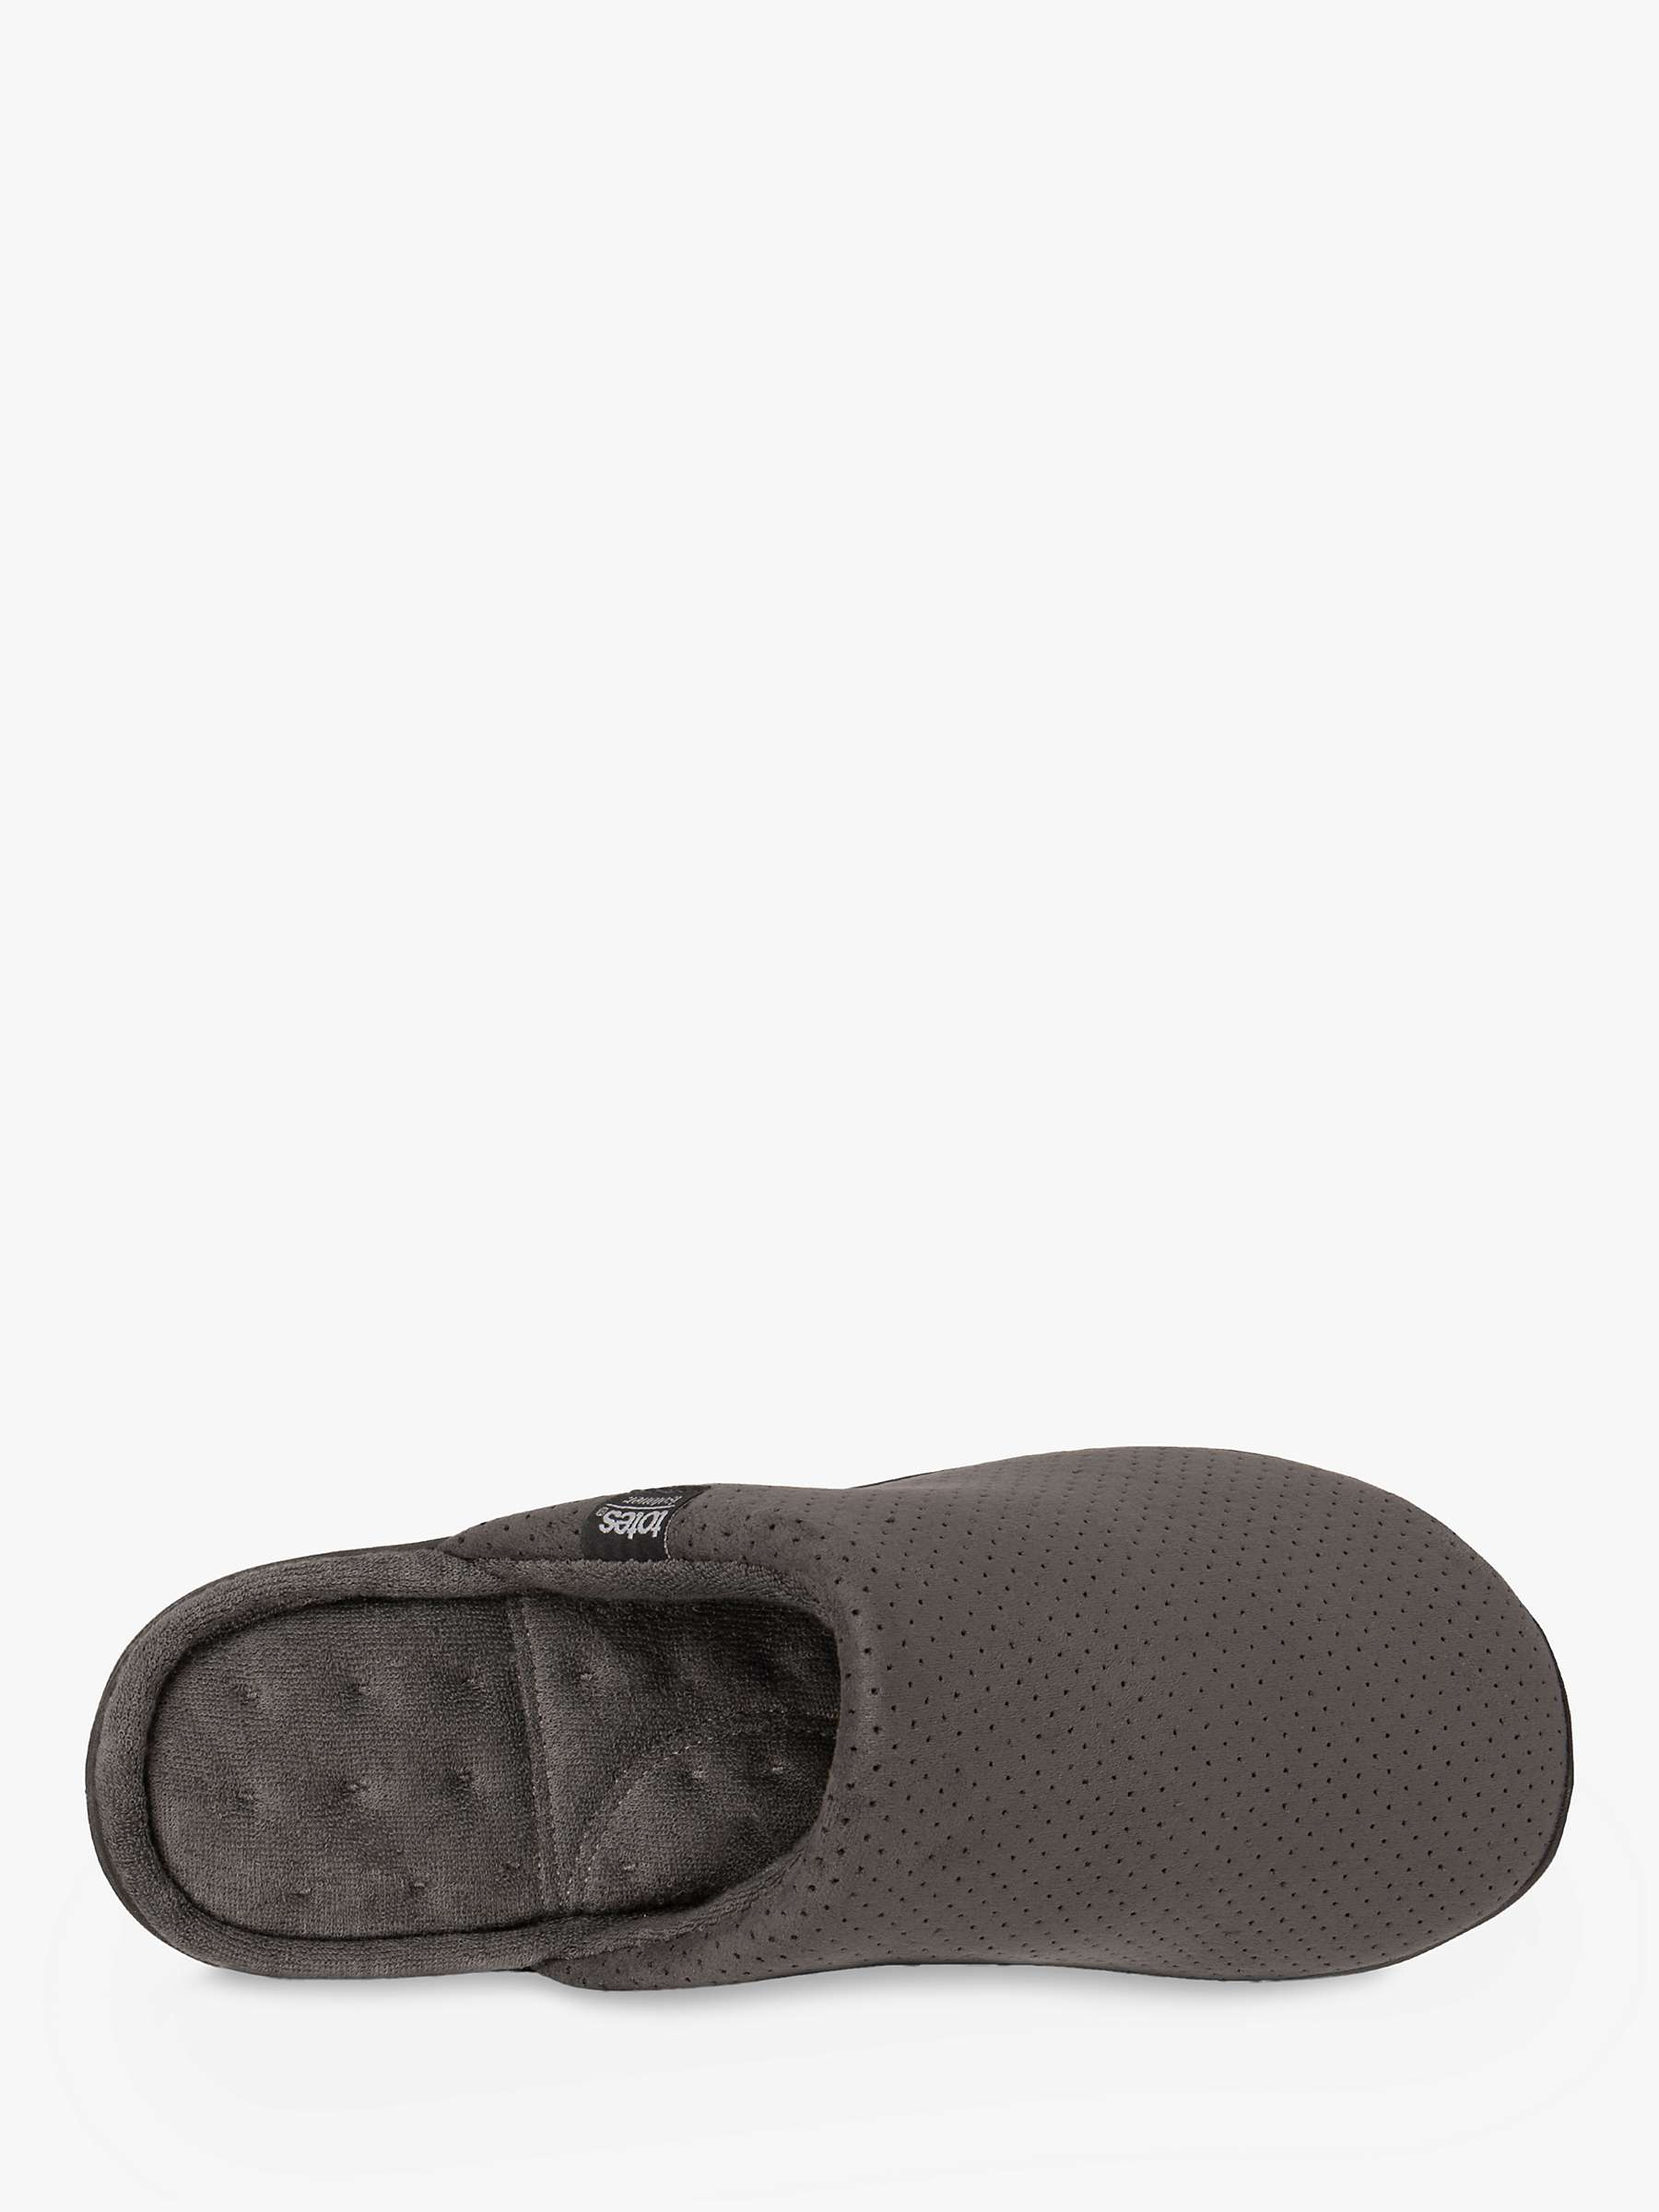 totes Airtex Suedette Mule Slippers, Grey at John Lewis & Partners